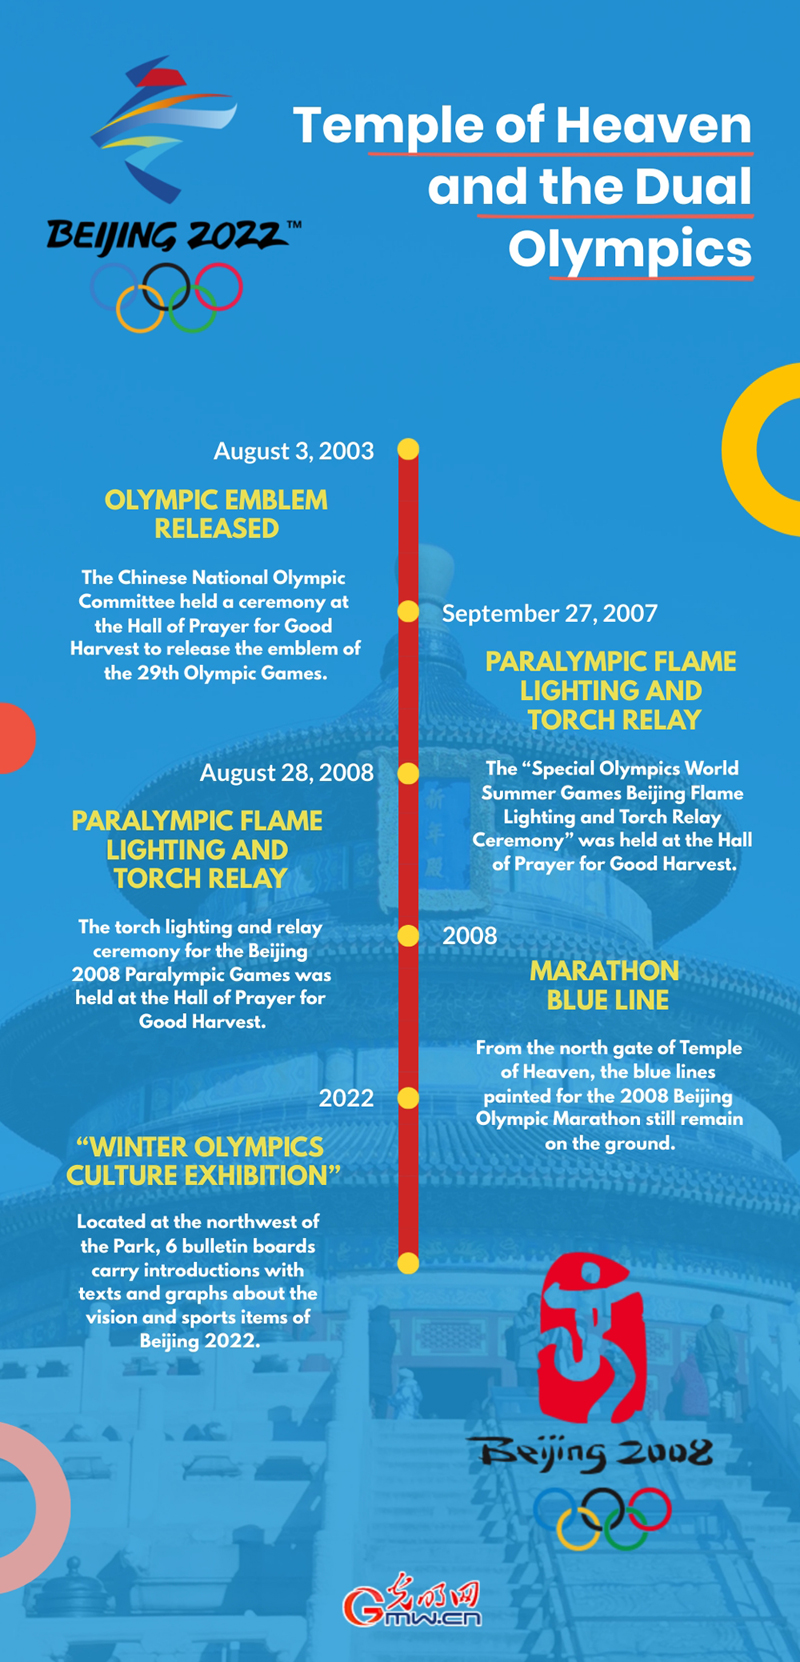 Temple of Heaven and the Dual Olympics